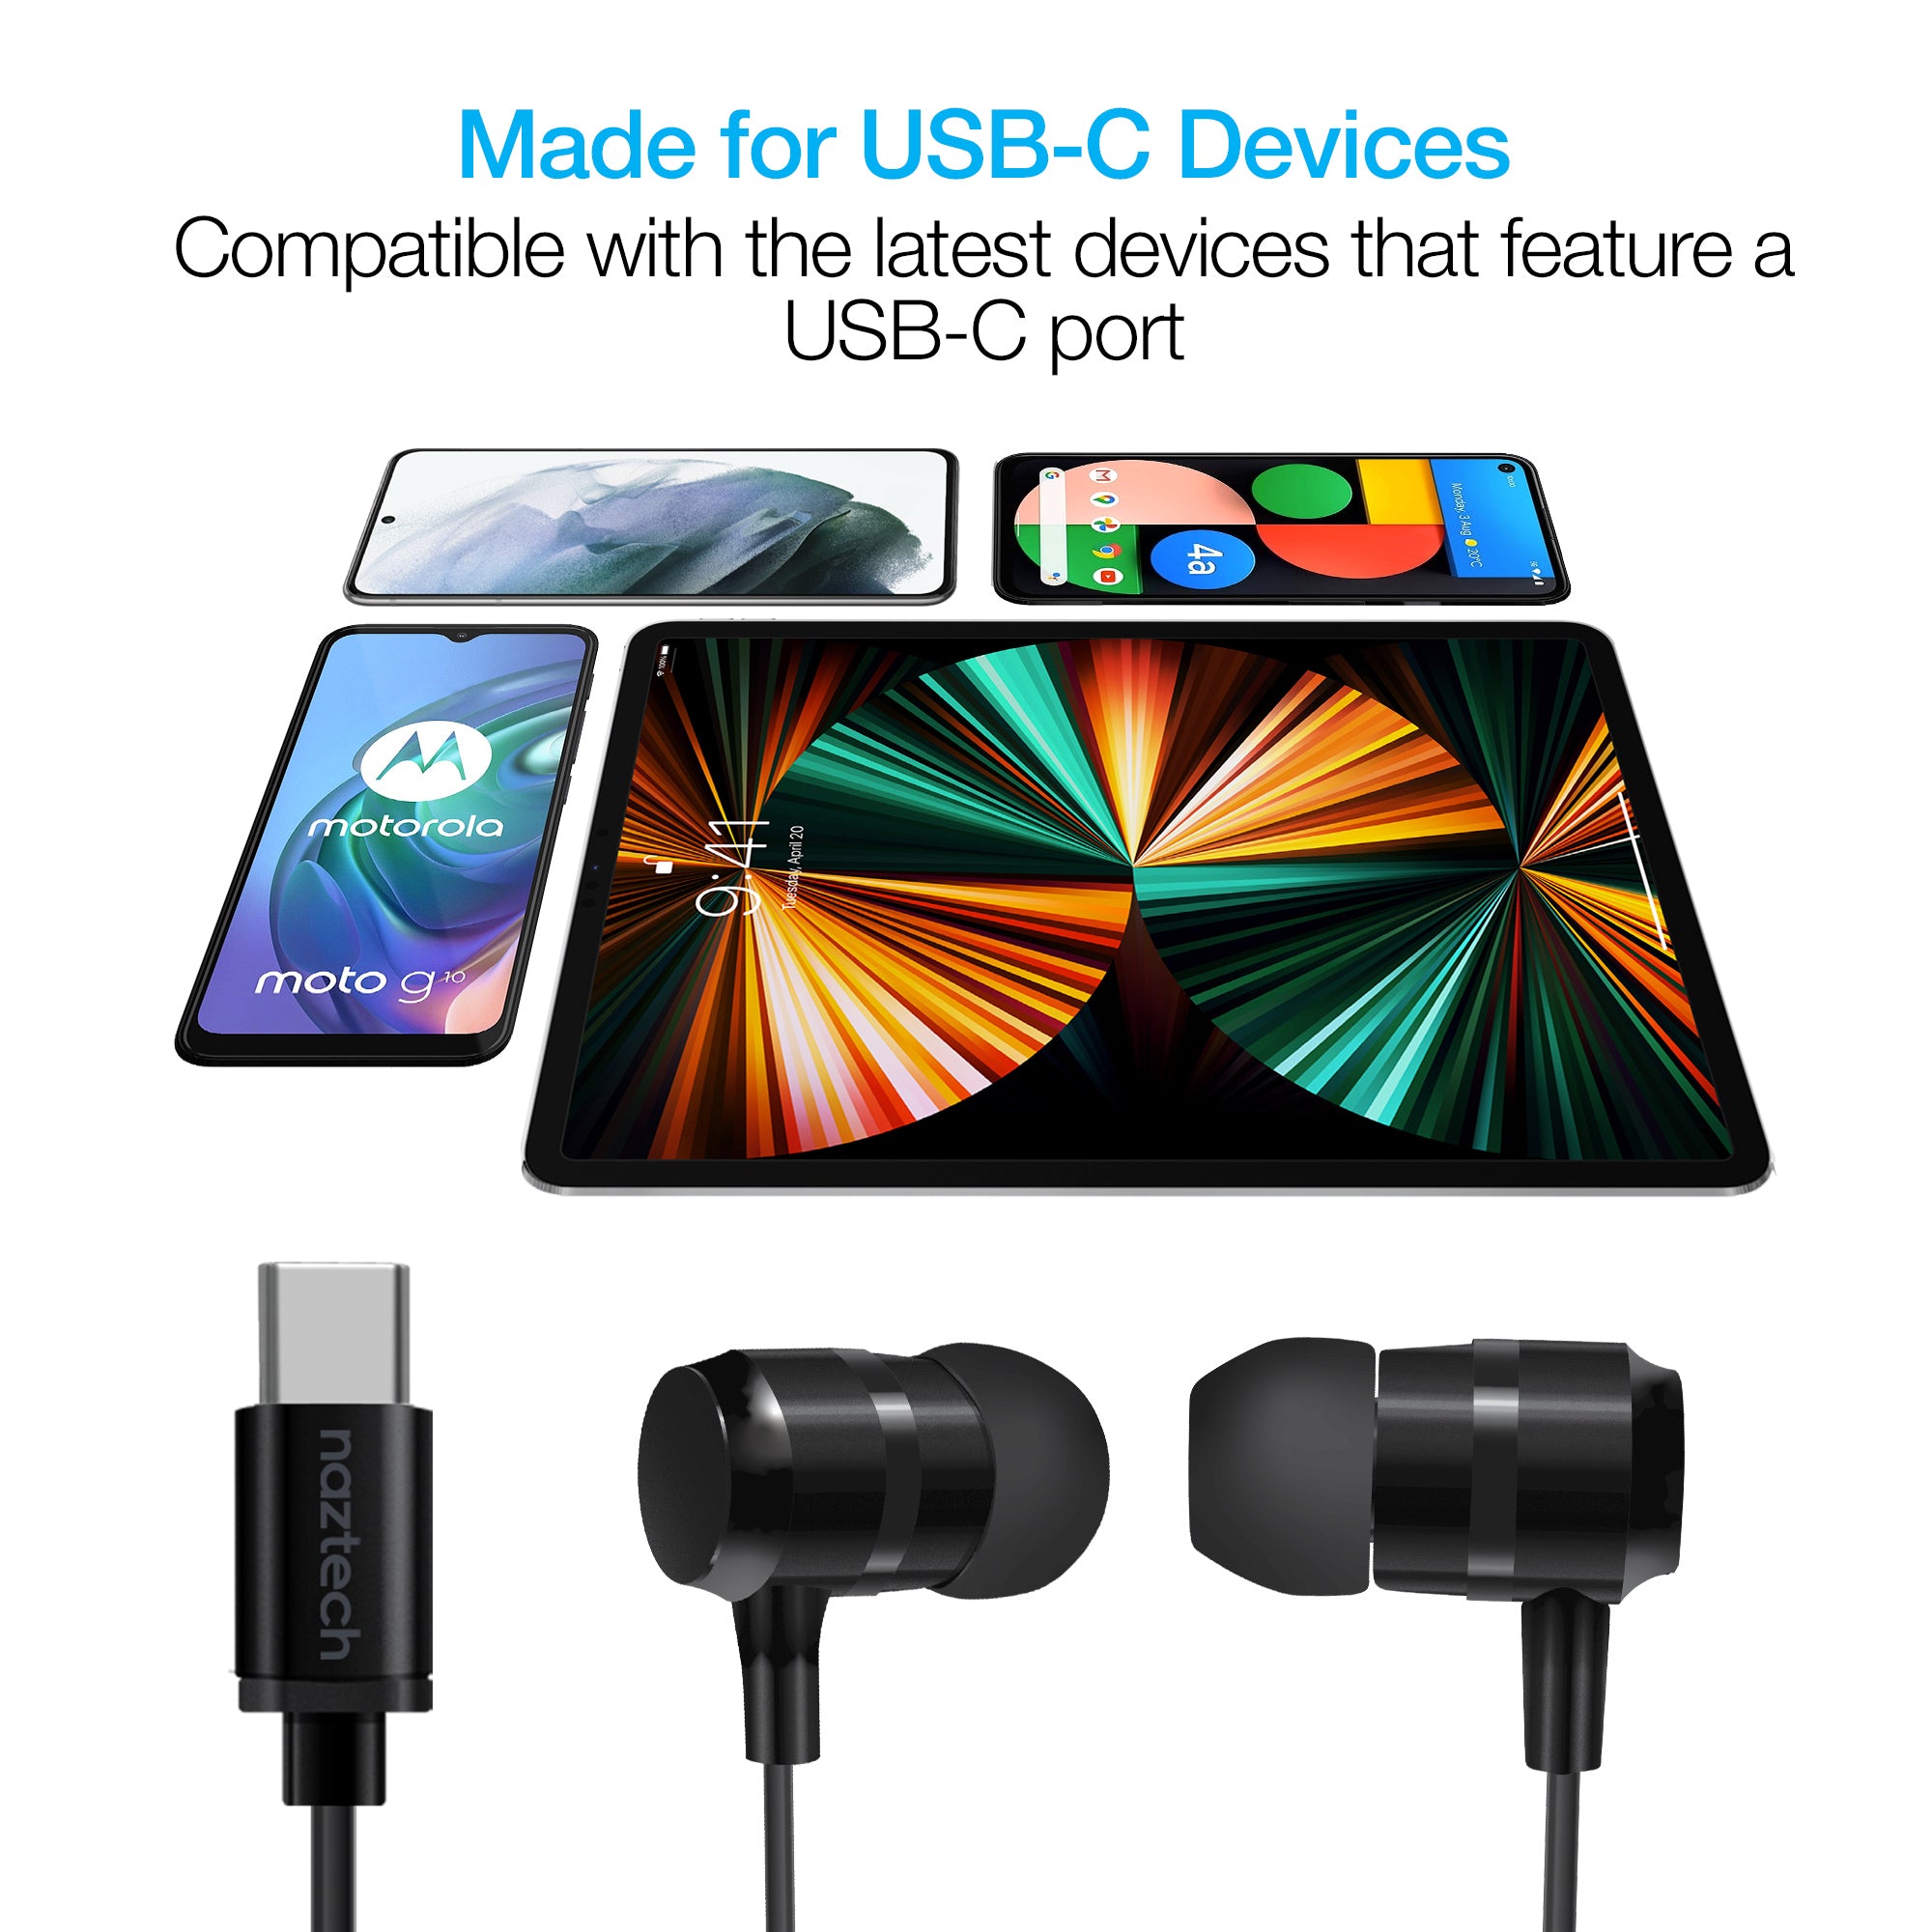 HELIX ULTRABUDS High Fidelity Earbuds USB-C Connector Graphene Drivers New  Box!